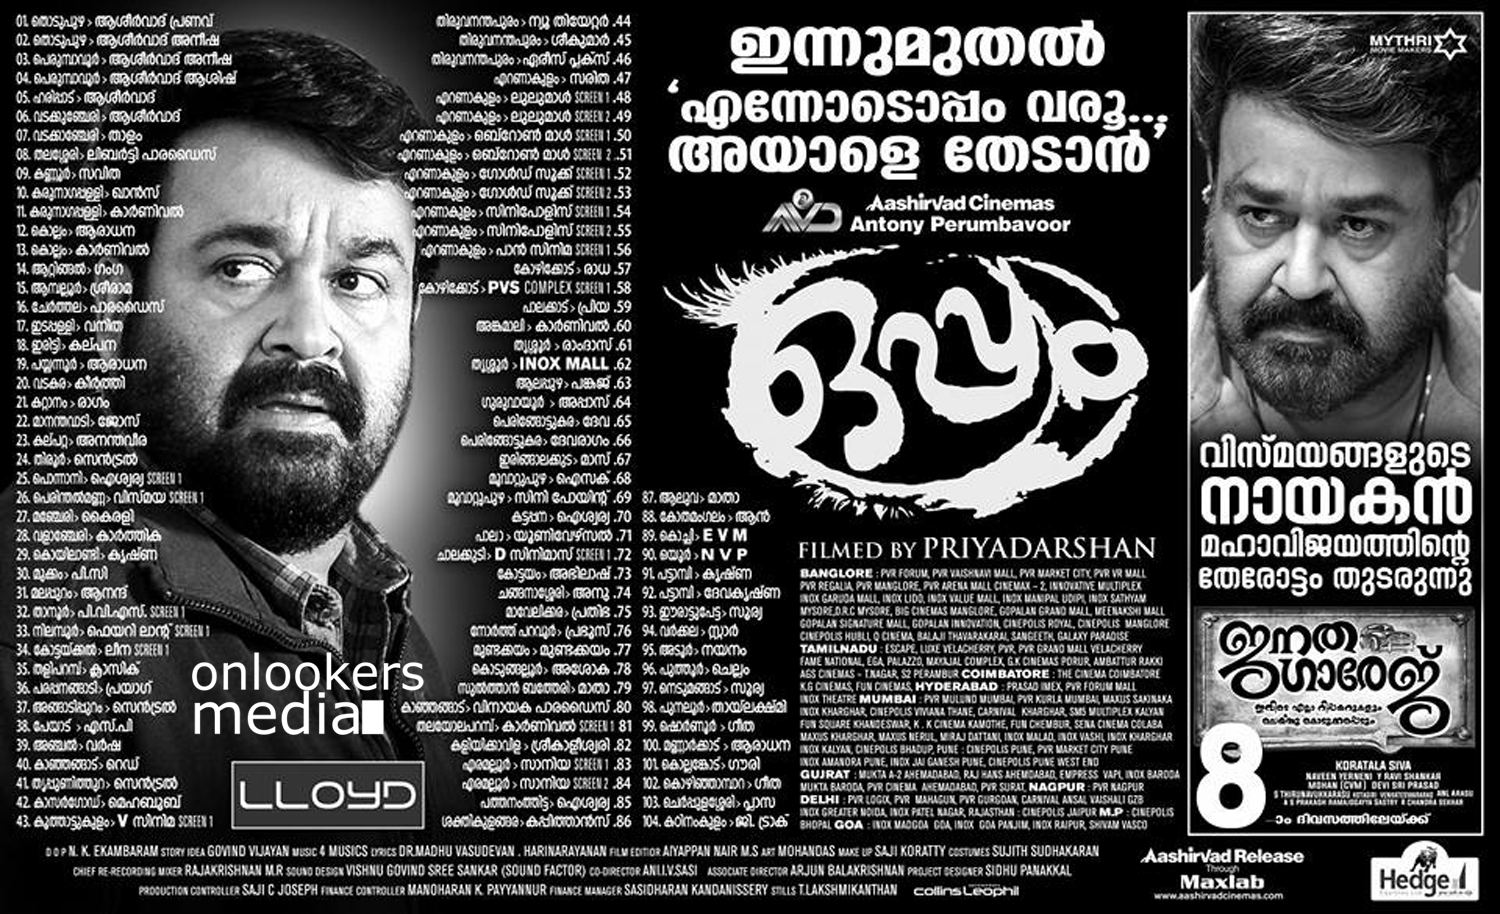 oppam theatre list show time ticket booking